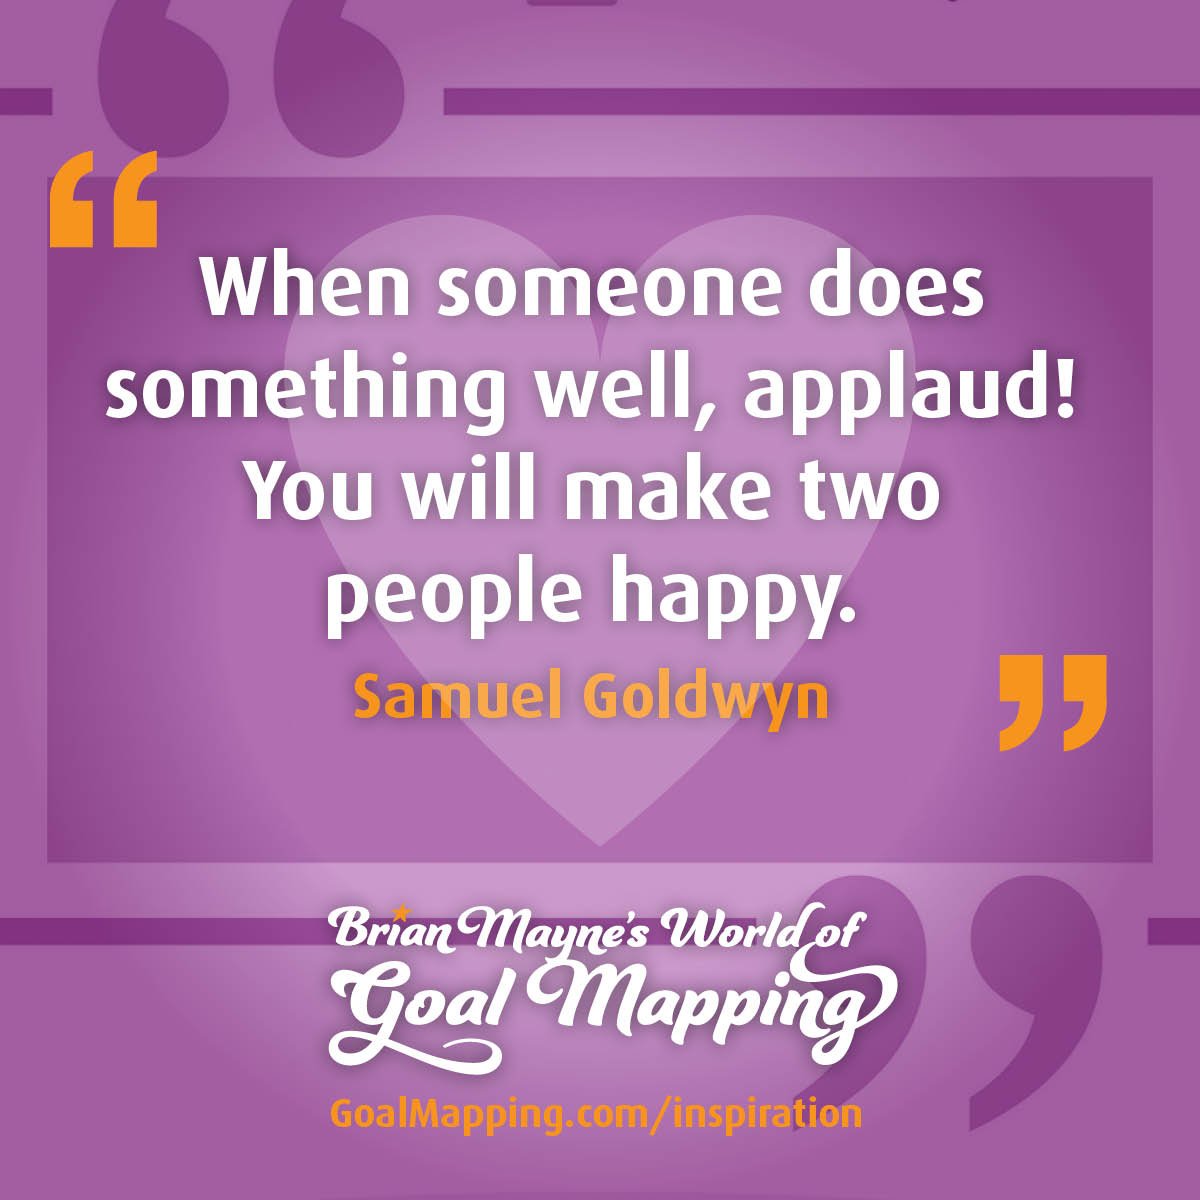 "When someone does something well, applaud! You will make two people happy." Samuel Goldwyn